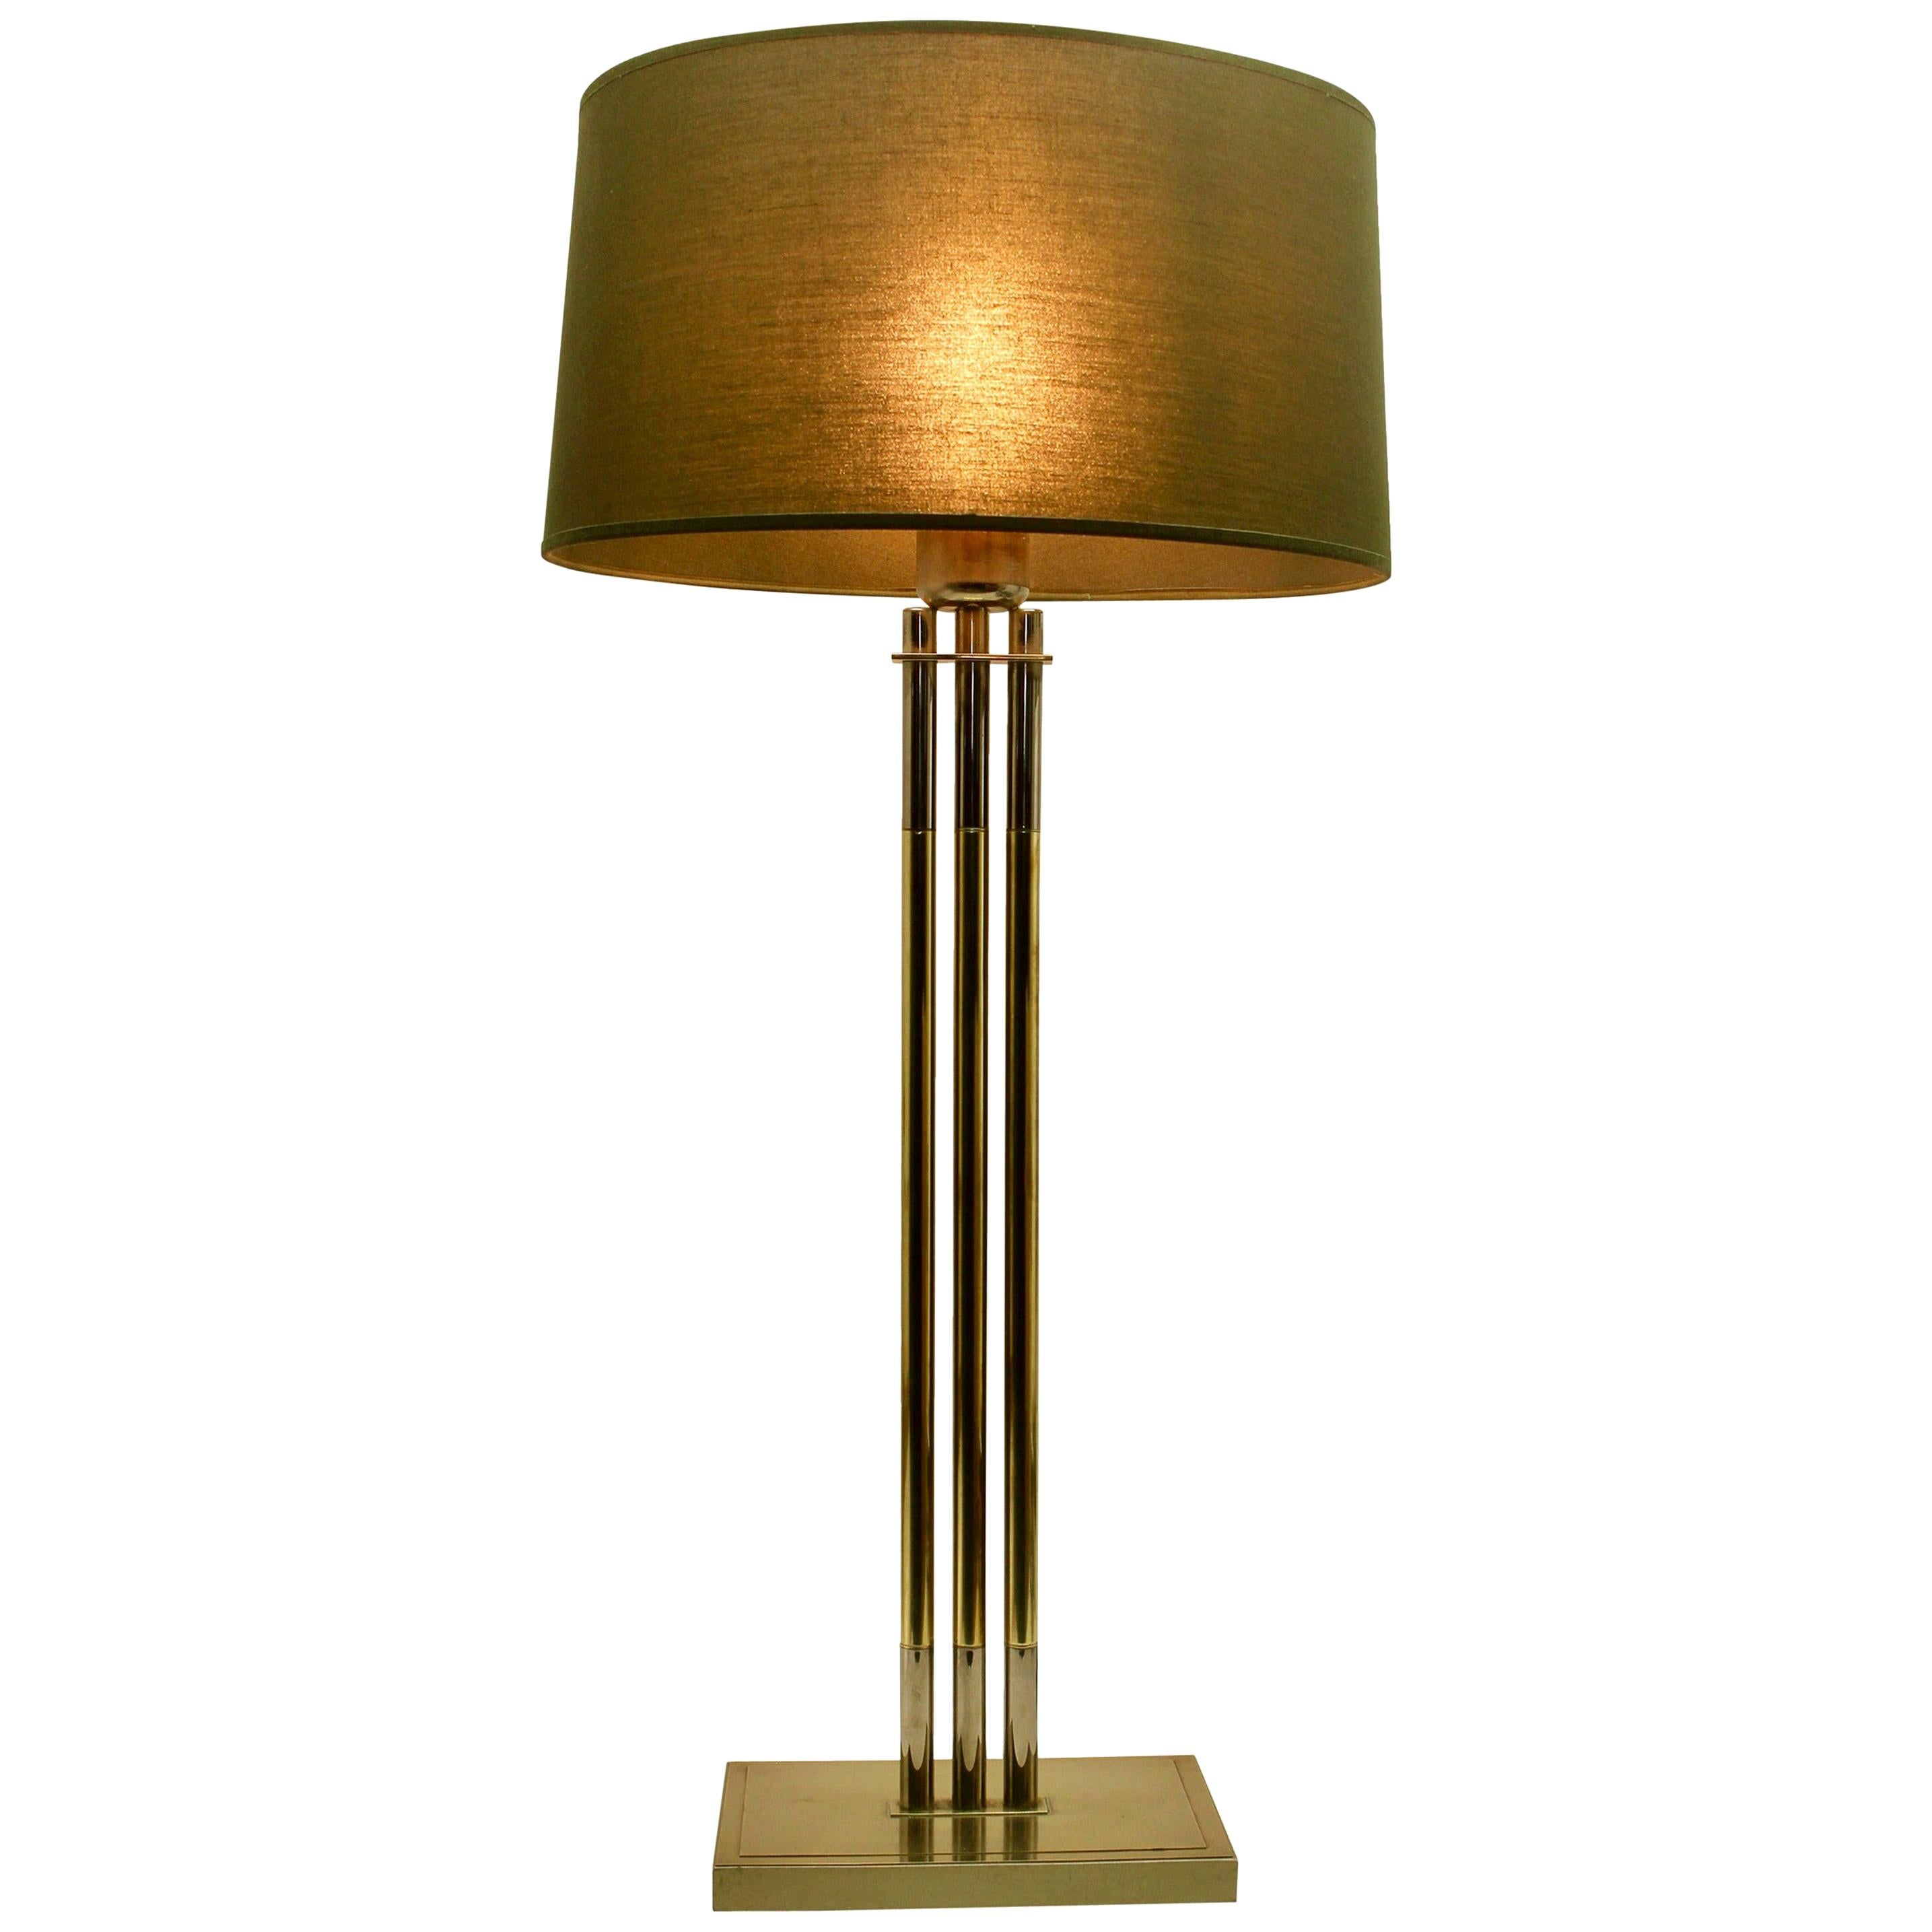 Vintage Brass Table Lamp by Willy Rizzo for De Knudt, 'Numbered 3784', 1970s